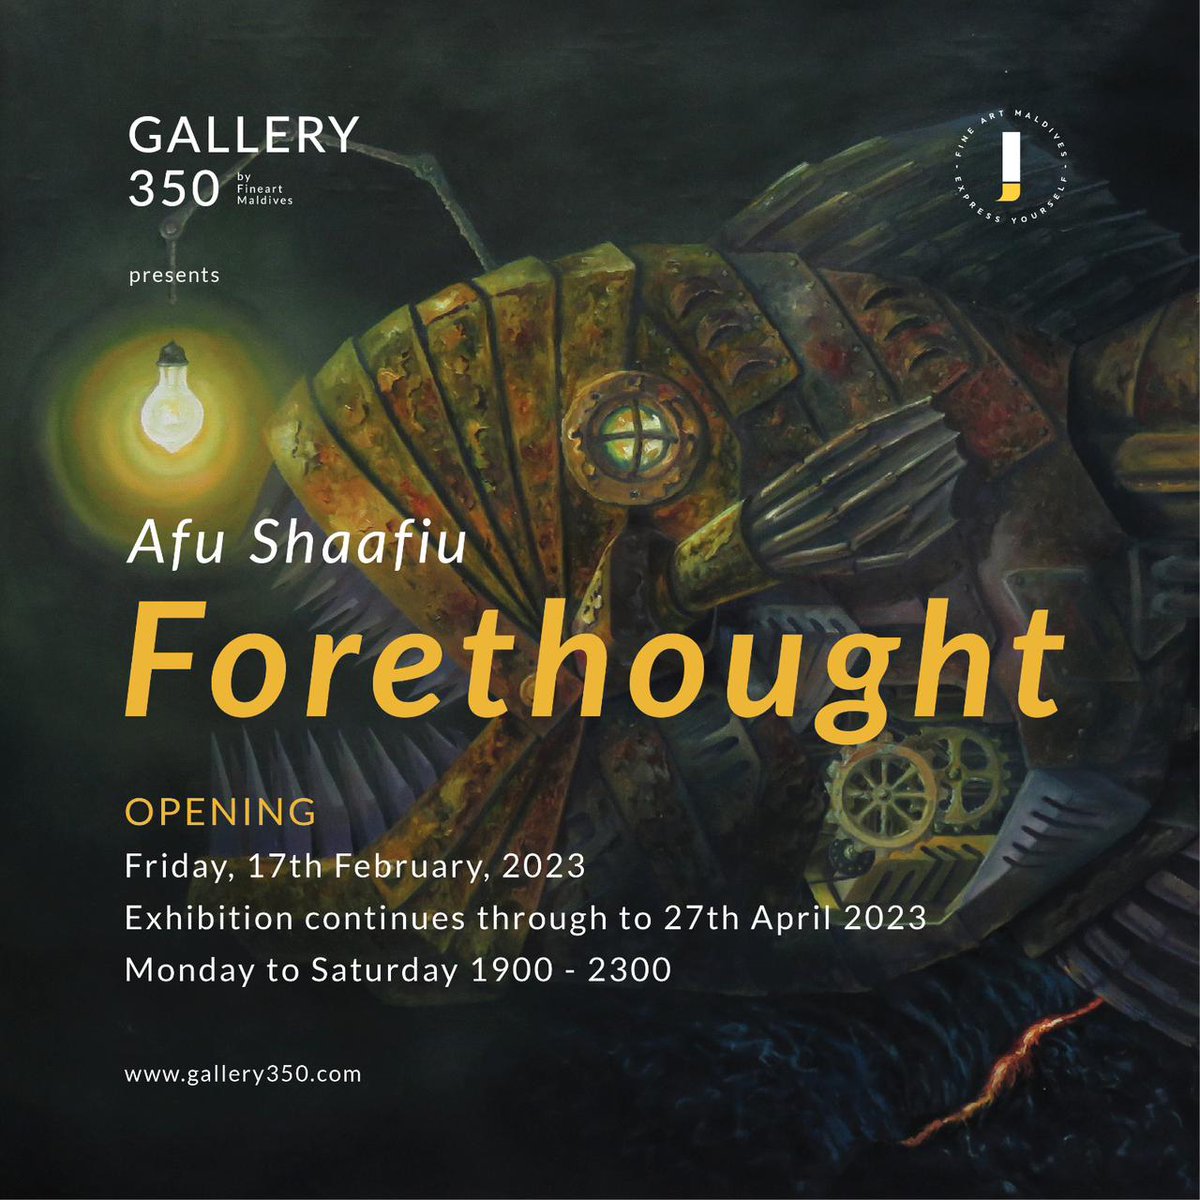 'Forethought' a Solo Exhibition by Afu Shaafiu. Visit Gallery 350 and be inspired 🙂
The exhibition goes on until 27th of April.
Open Saturday - Friday from 7 - 11 pm
Sunday closed.

#gallery350 #soloartexhibition #afushaafiu #forethought